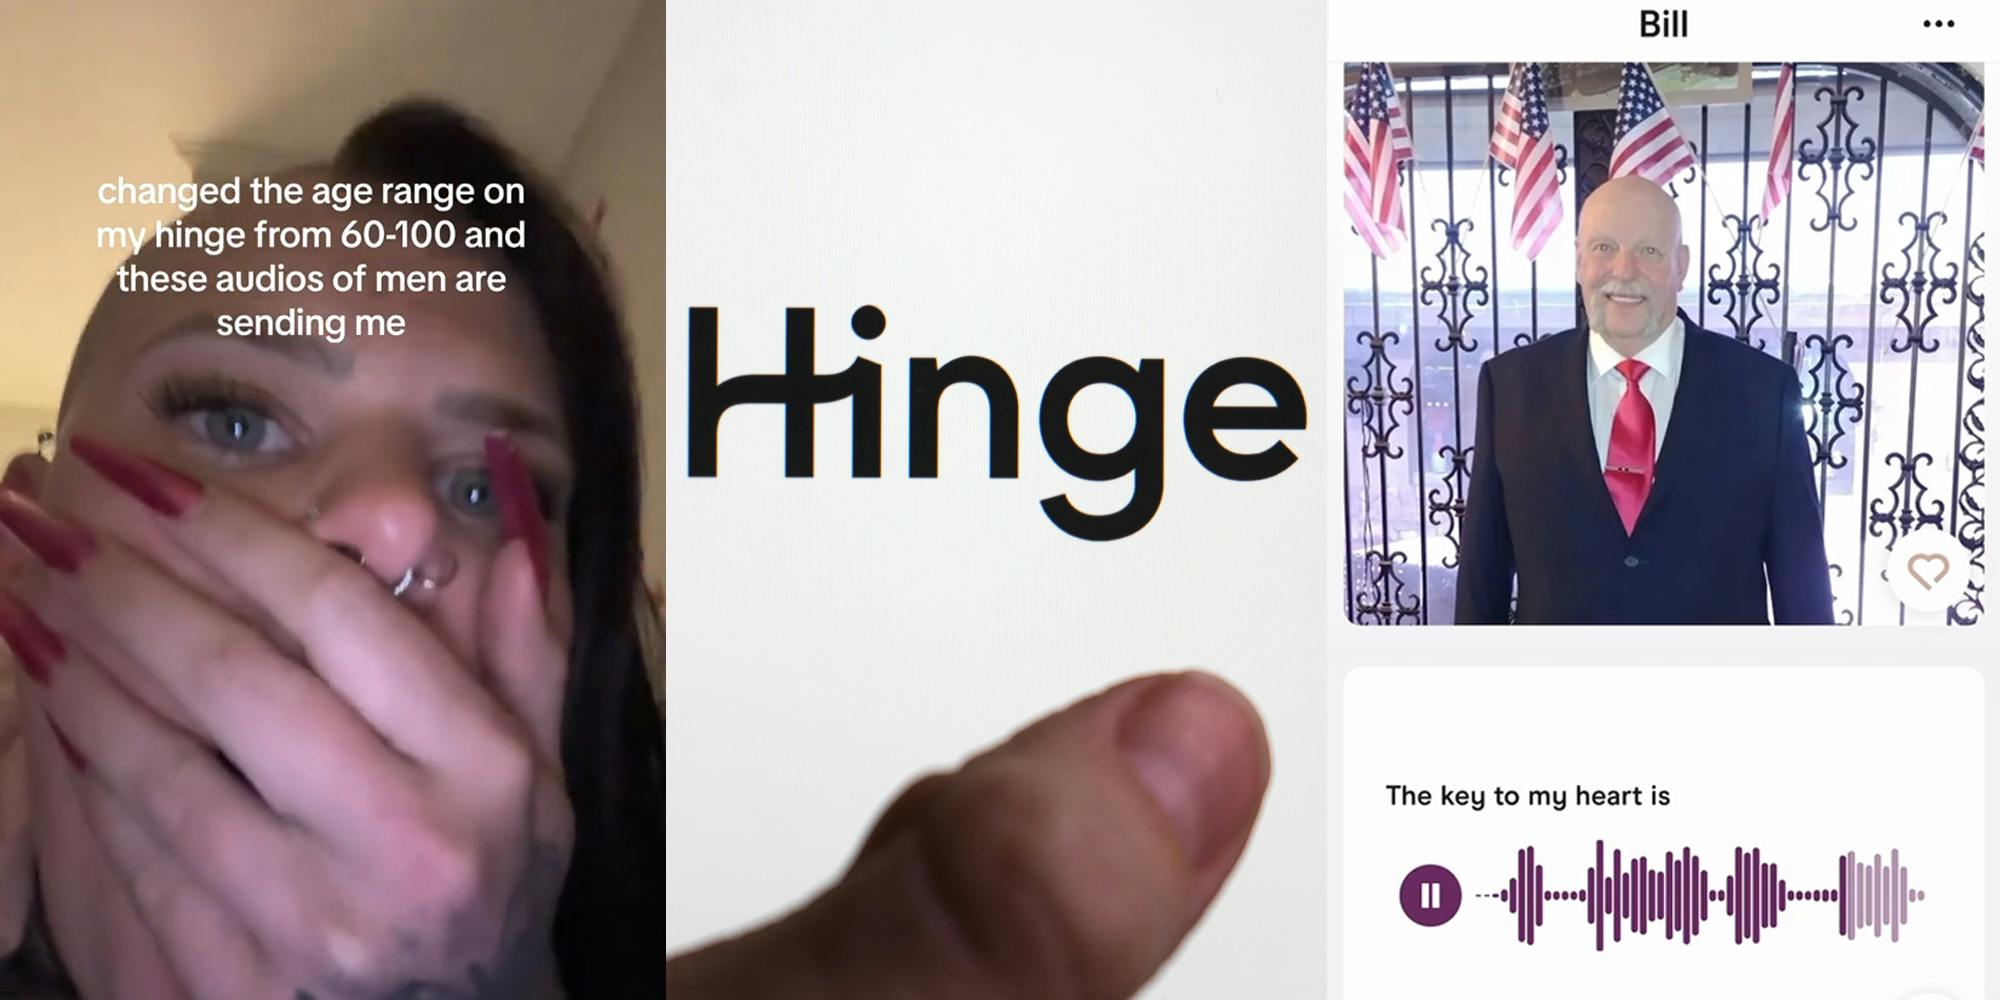 woman with caption "changed the age range on my hinge from 60-100 and these audios are sending me" (l) hand holding phone with Hinge on screen (c) Hinge dating profile with man's image and audio (r)